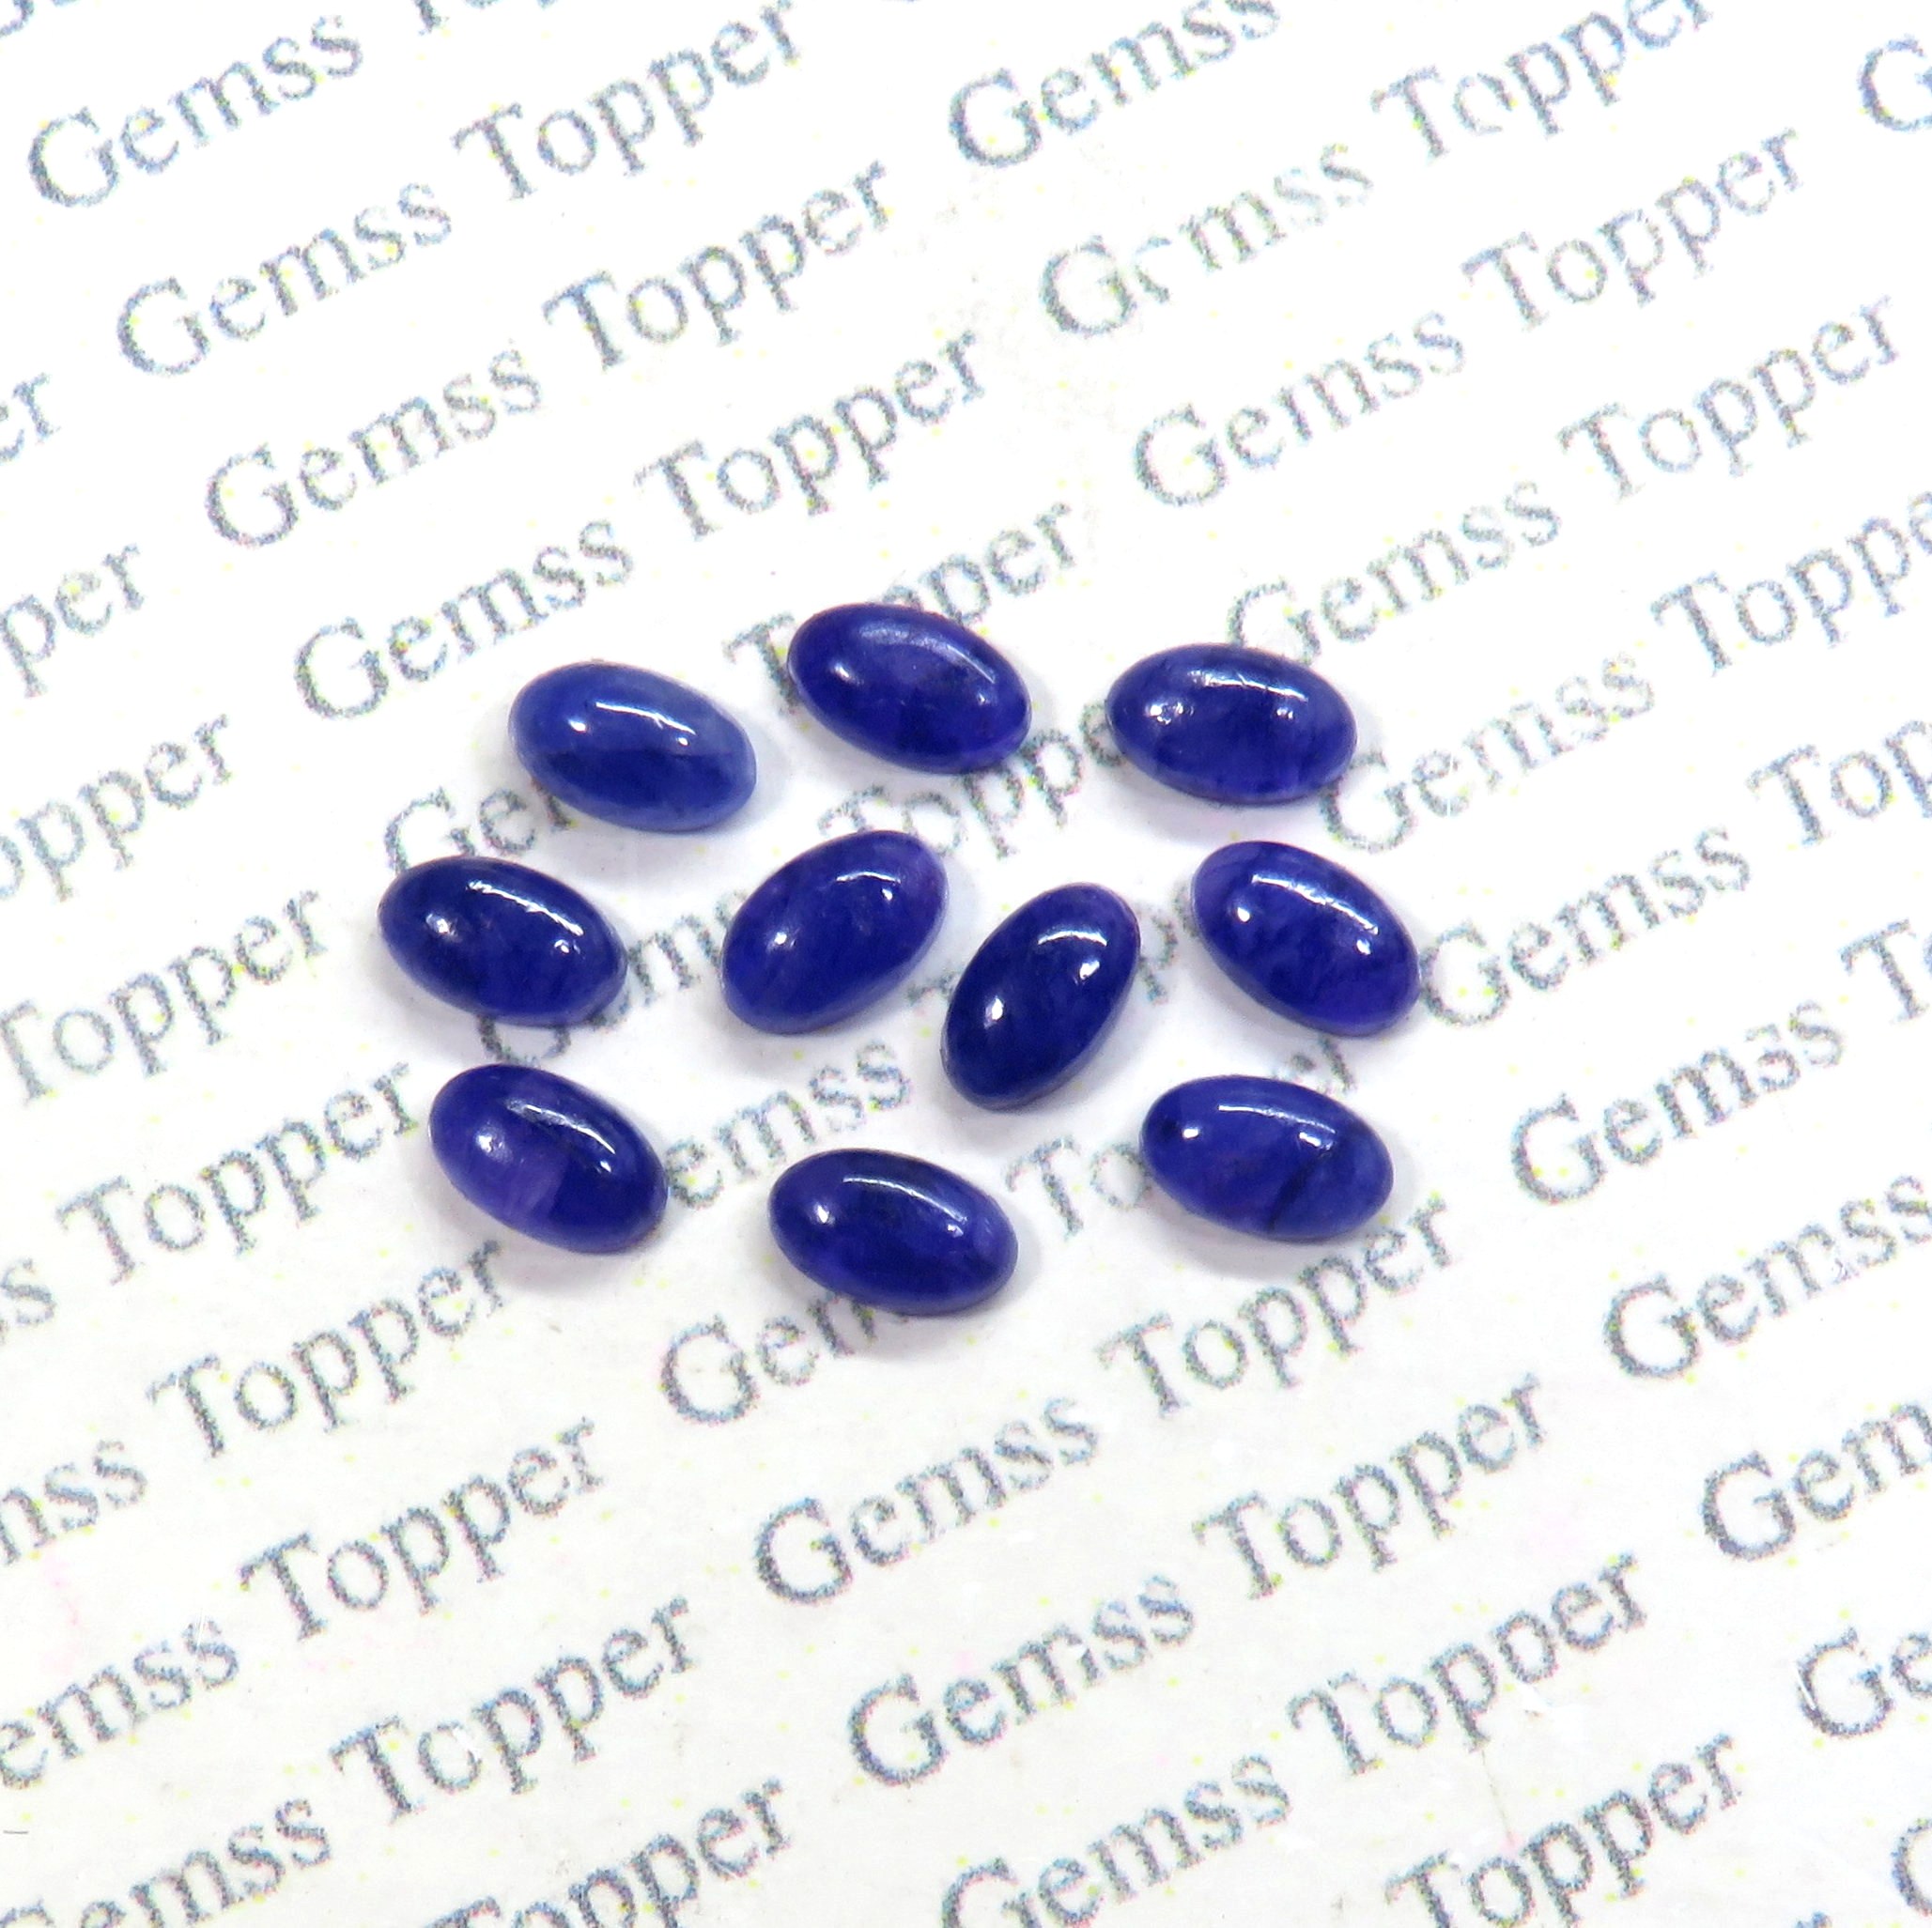 100% Natural Blue Sapphire 4x6 mm Oval Cabochon- AAA Quality Blue Sapphire Smooth Cabochon